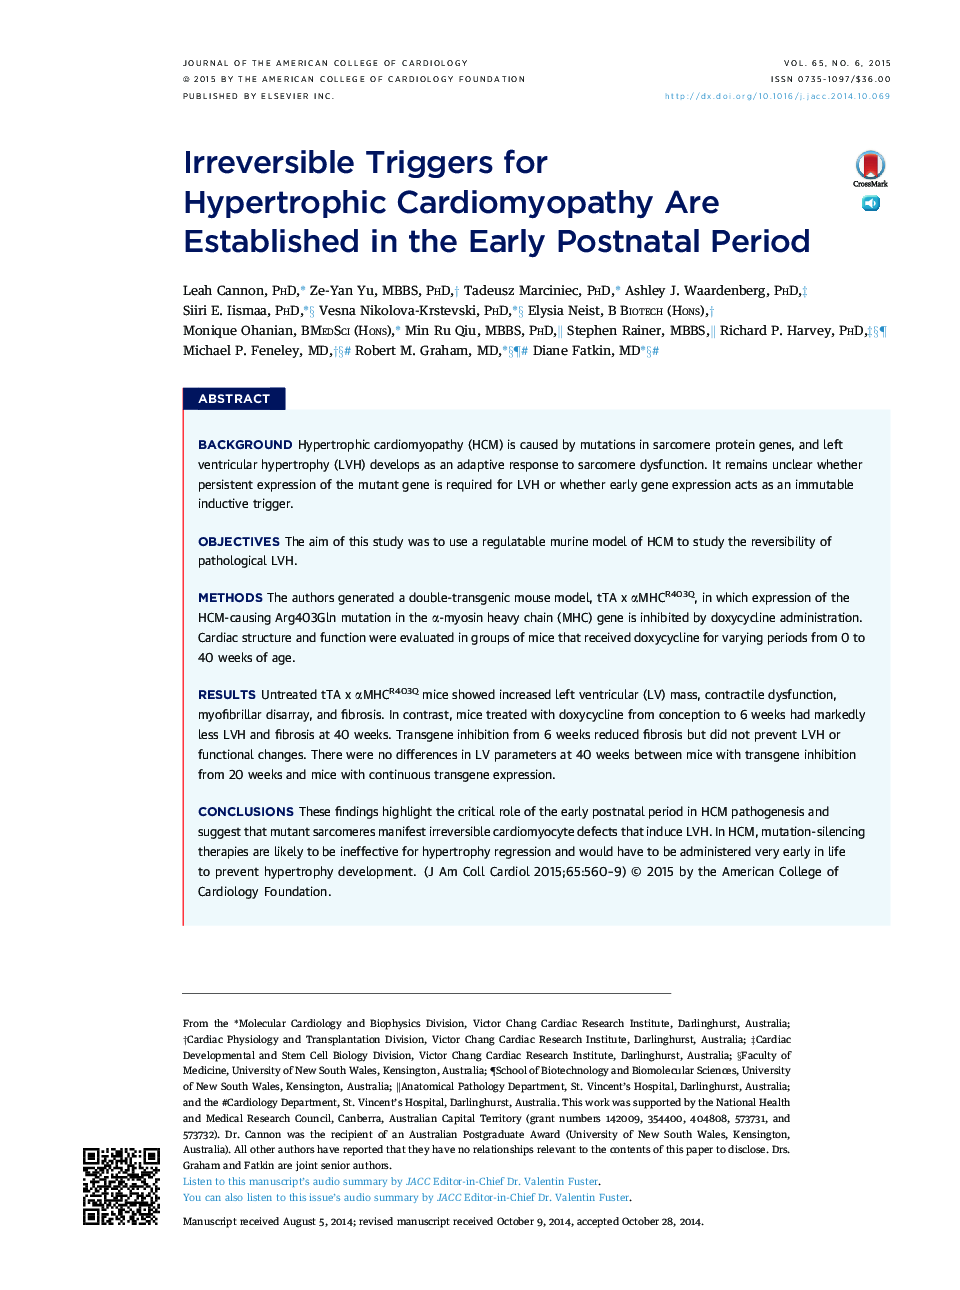 Irreversible Triggers for HypertrophicÂ Cardiomyopathy Are Established in the Early Postnatal Period